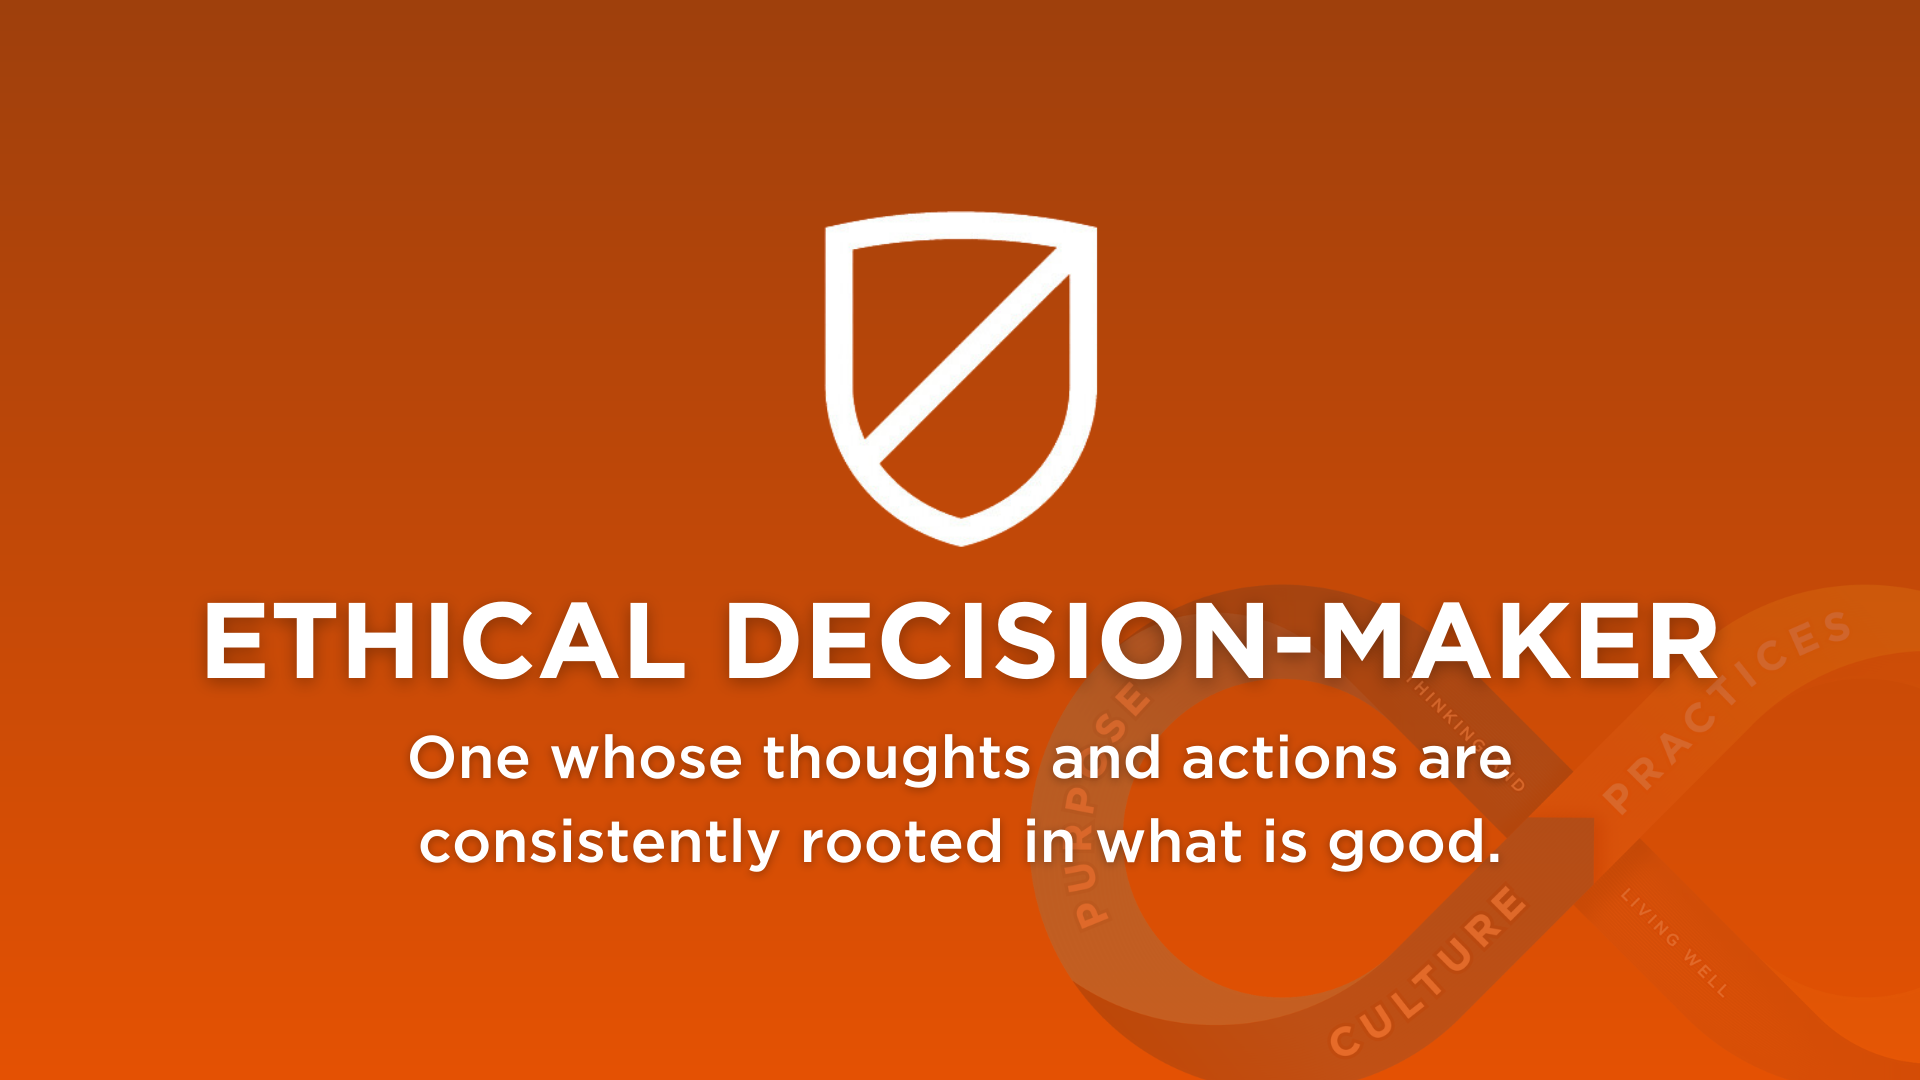 graphic for Ethical Decision-maker - One whose thoughts and actions are consistently rooted in what is good.